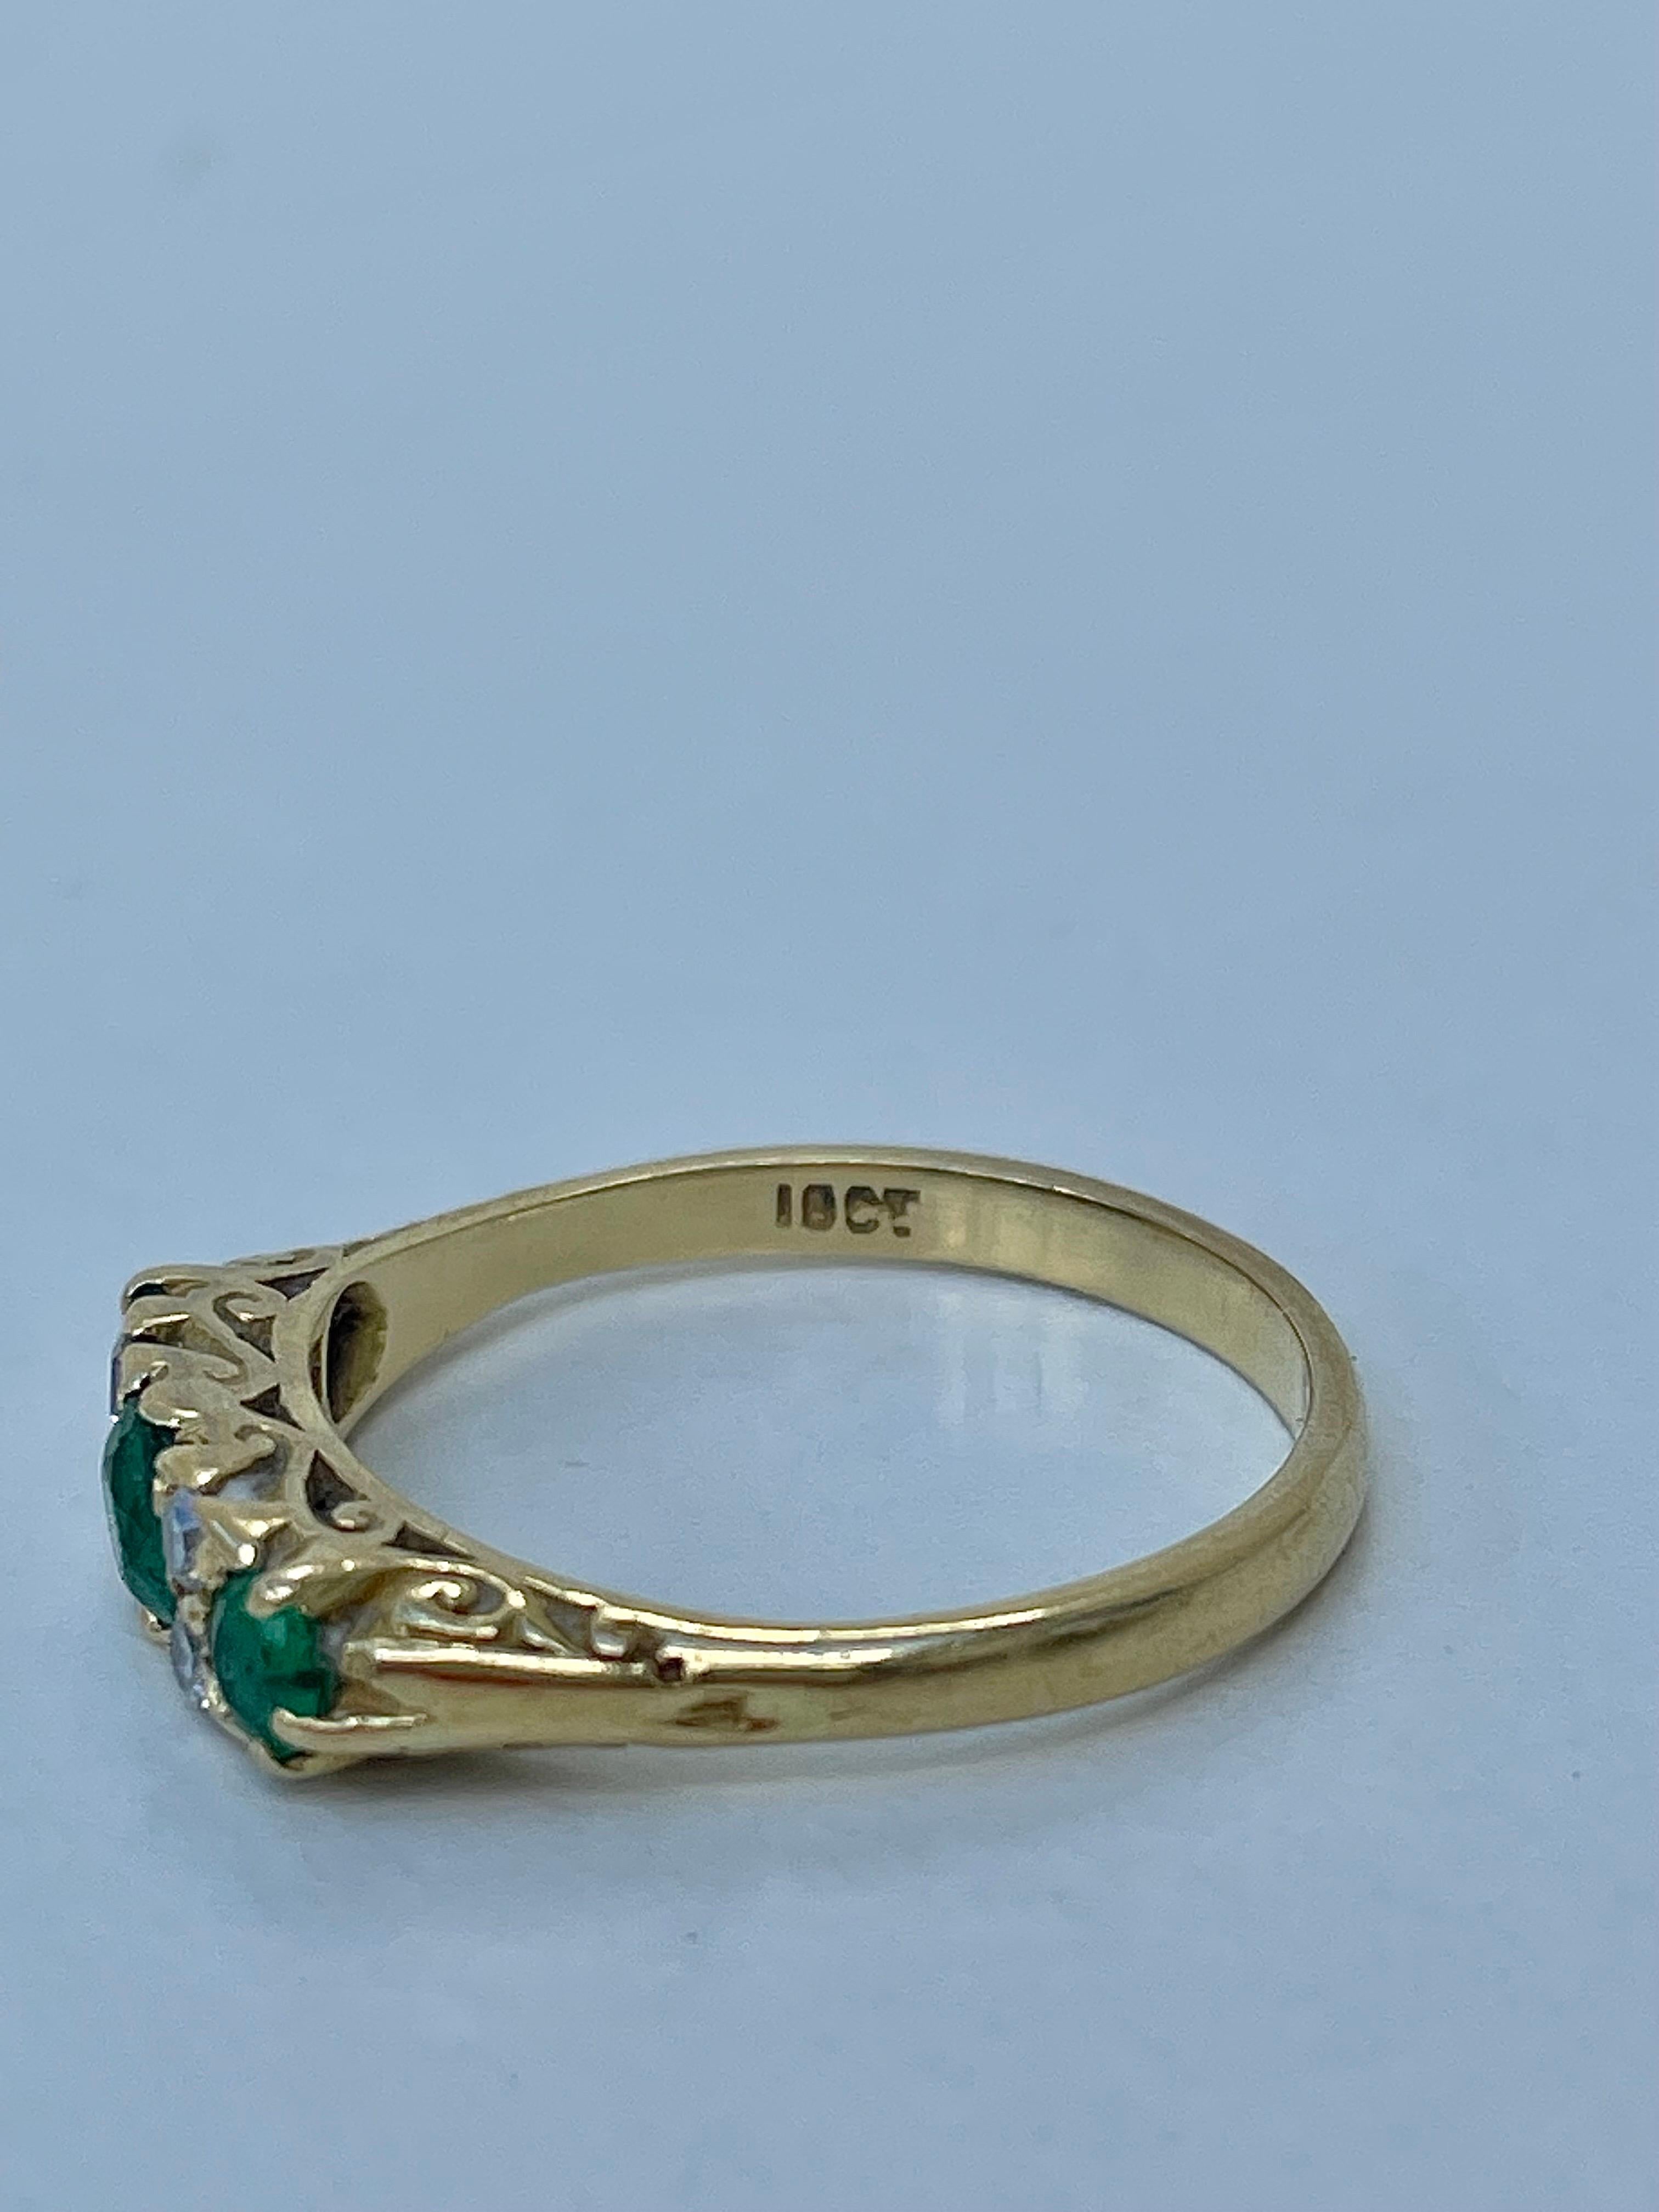 Antique 18ct Yellow Gold Emerald and Diamond Ring 

most beautiful and elegant multi stone ring with a lovely detailed scroll 

The item comes without the box in the photos but will be presented in a gift box

Measurements: weight 3.91g, size UK Q,